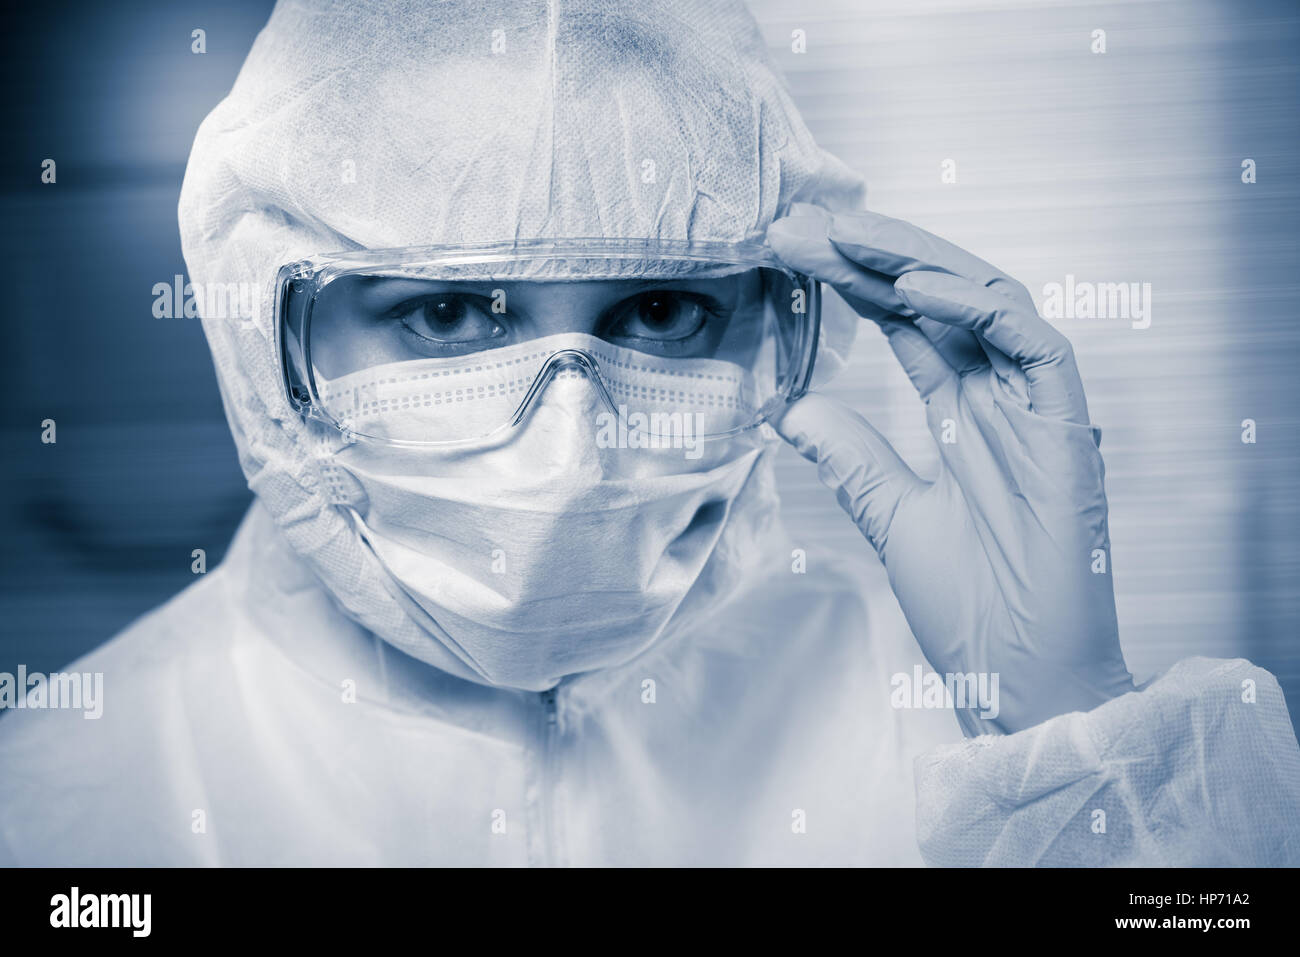 Researcher wearing hazmat protective suit and safety goggles Stock ...